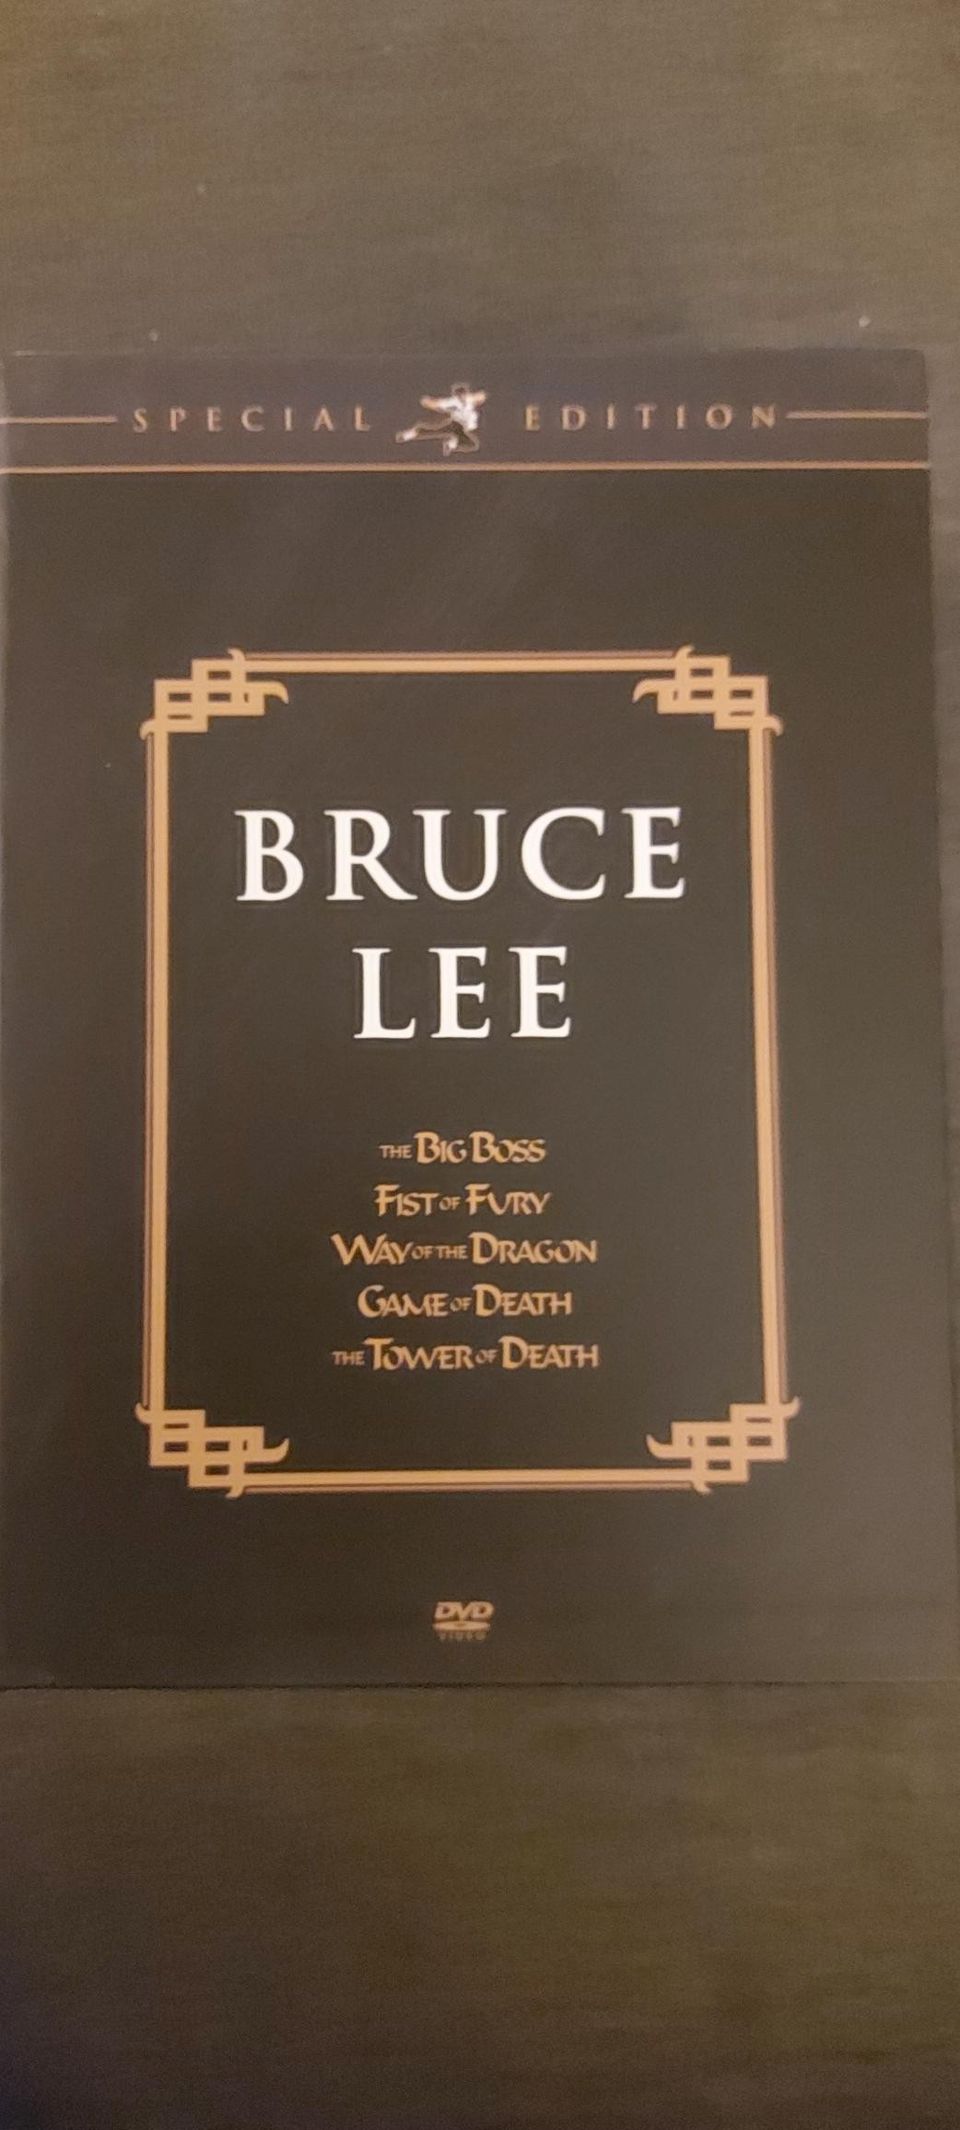 Bruce Lee Special Edition DVD-Box